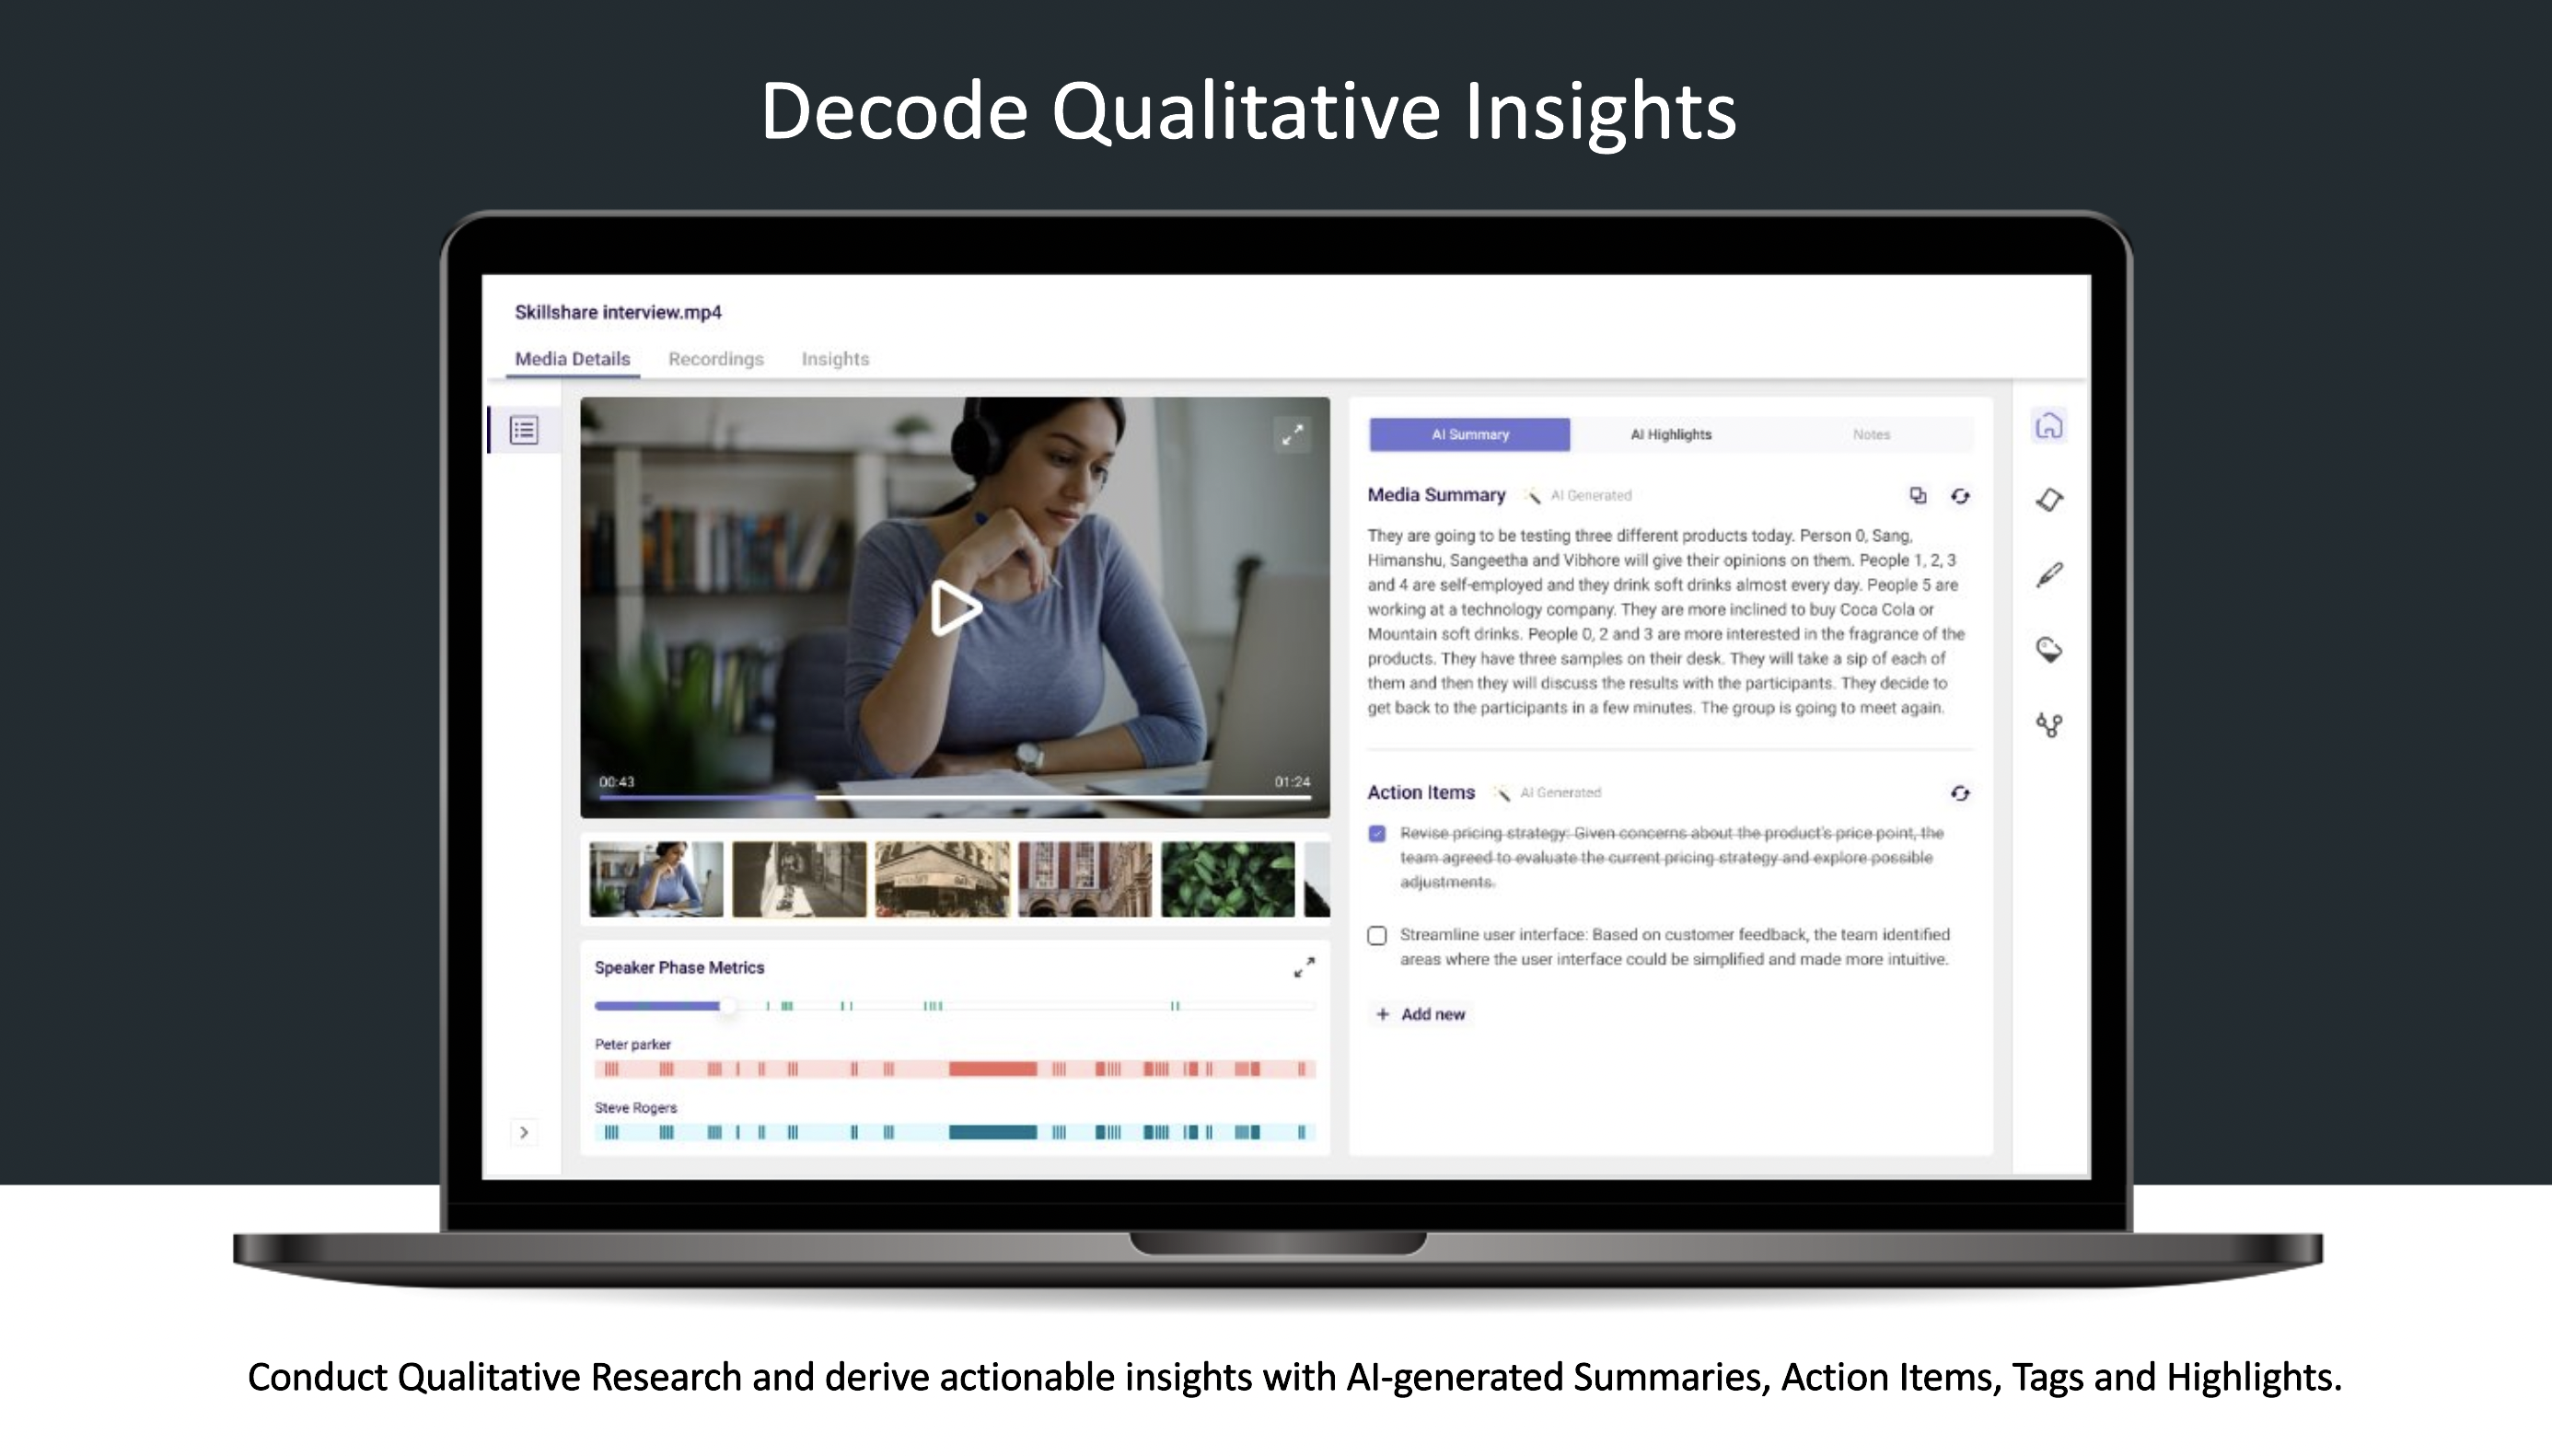 Conduct Qualitative Research and derive actionable insights with AI-generated Summaries, Action Items, Tags and Highlights.​